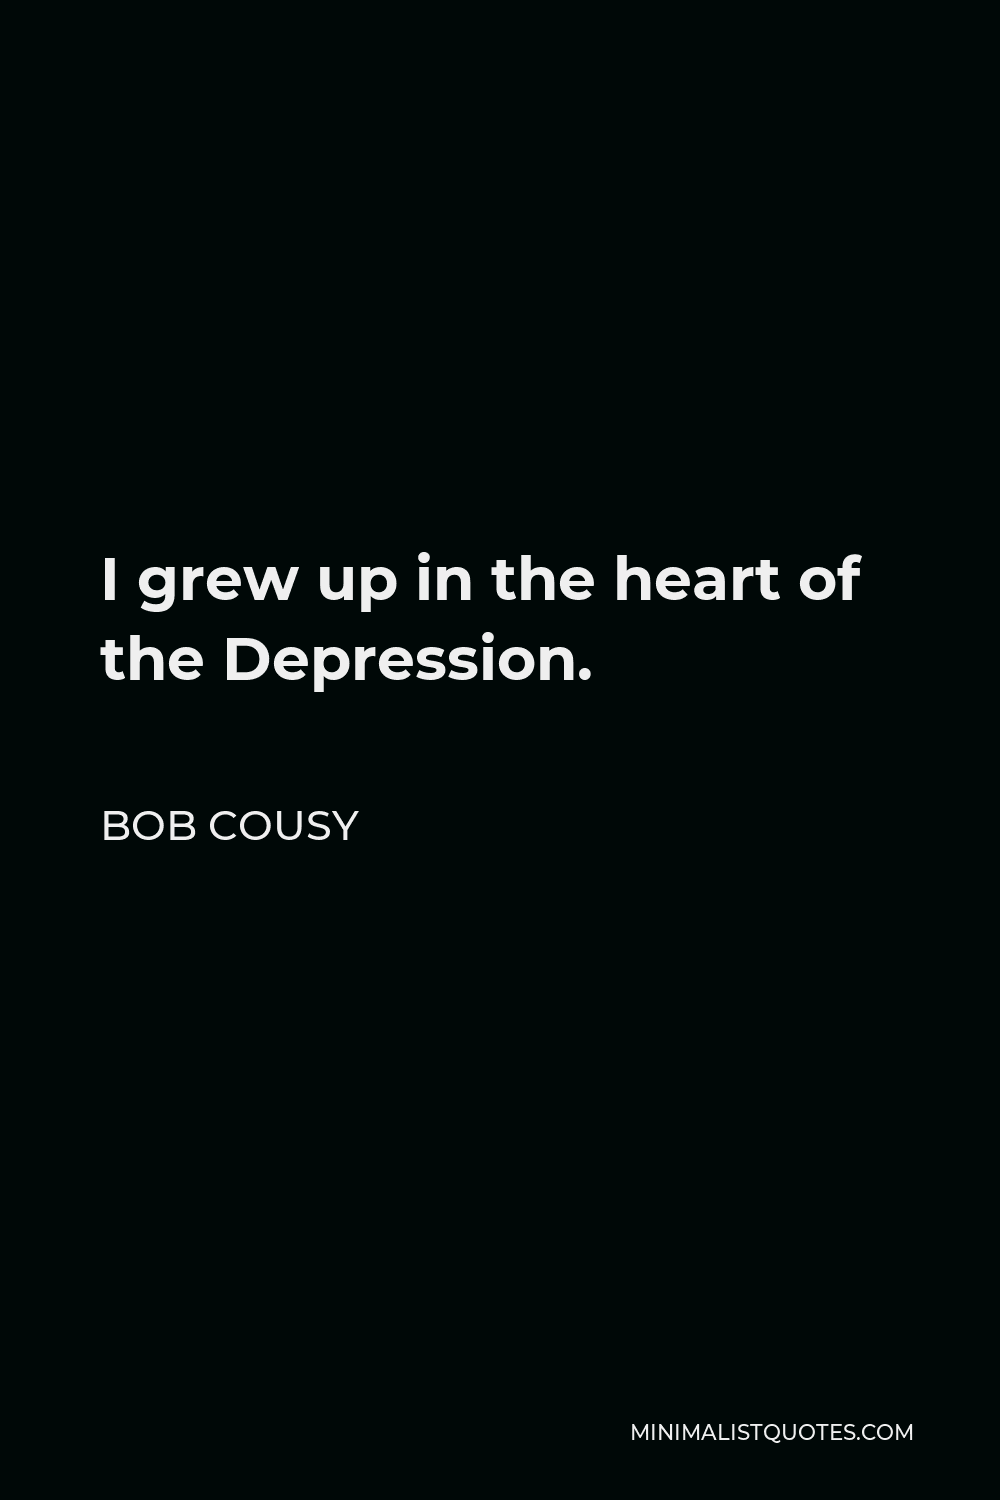 Bob Cousy Quote - I grew up in the heart of the Depression.